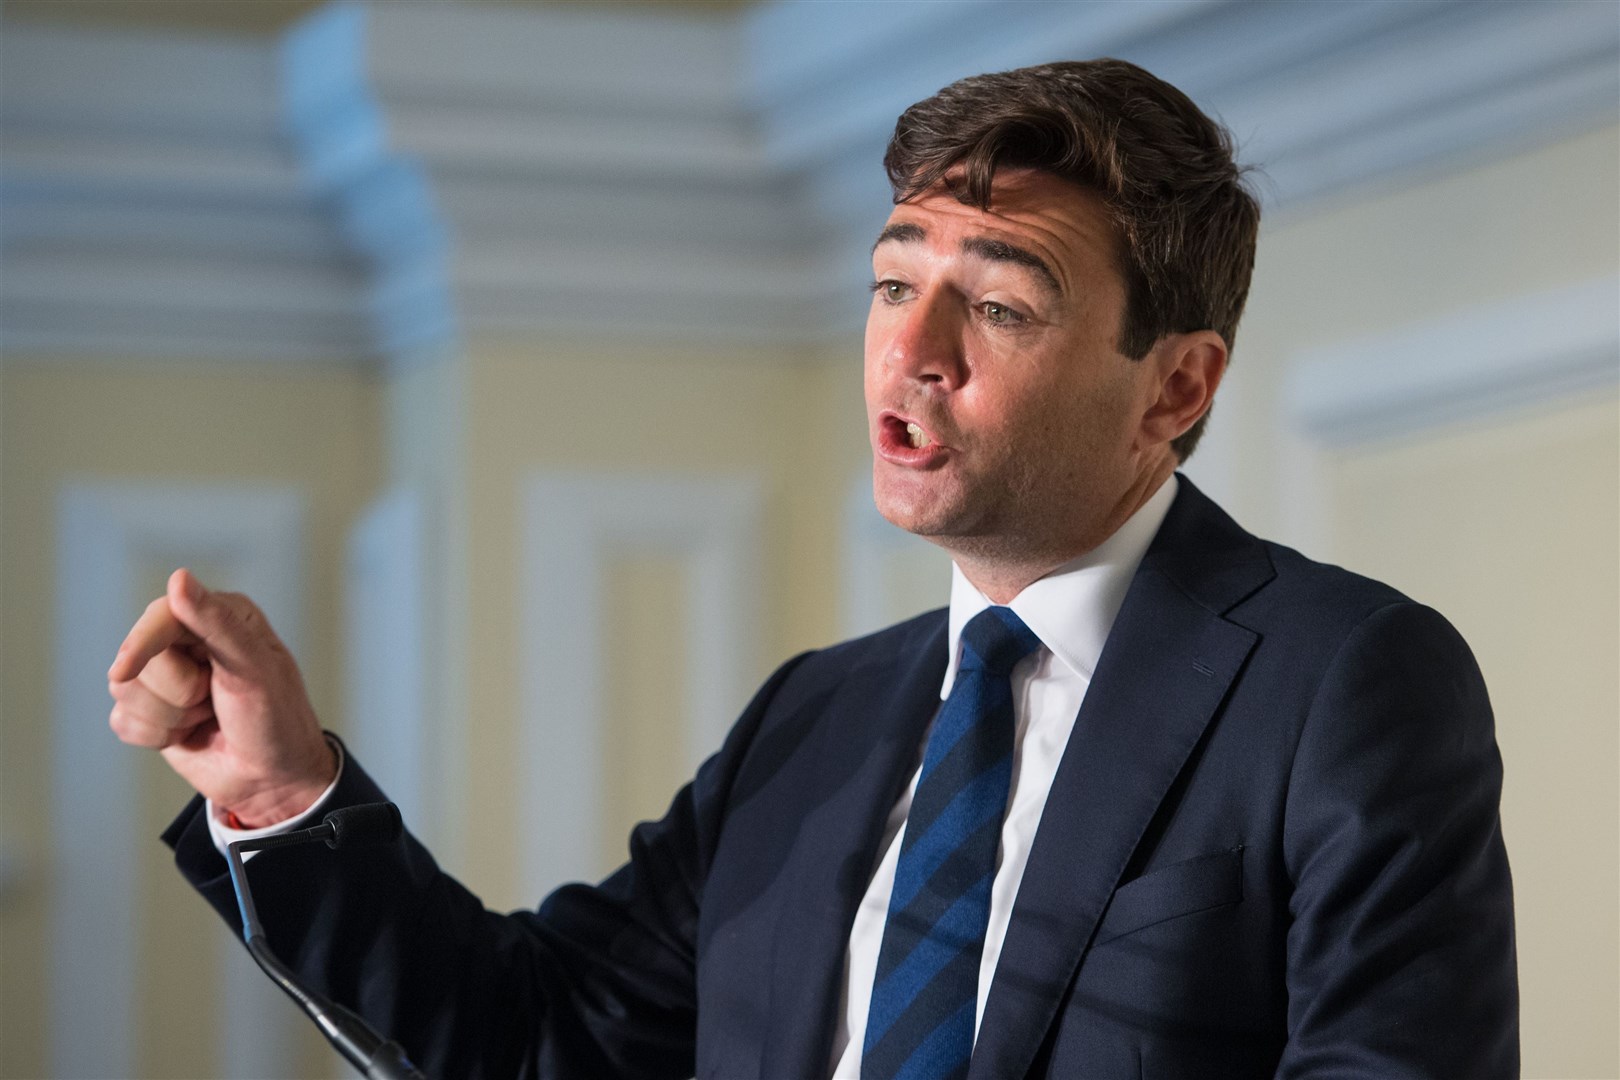 Greater Manchester mayor Andy Burnham says there has been no consultation by ministers (Dominic Lipinski/PA)